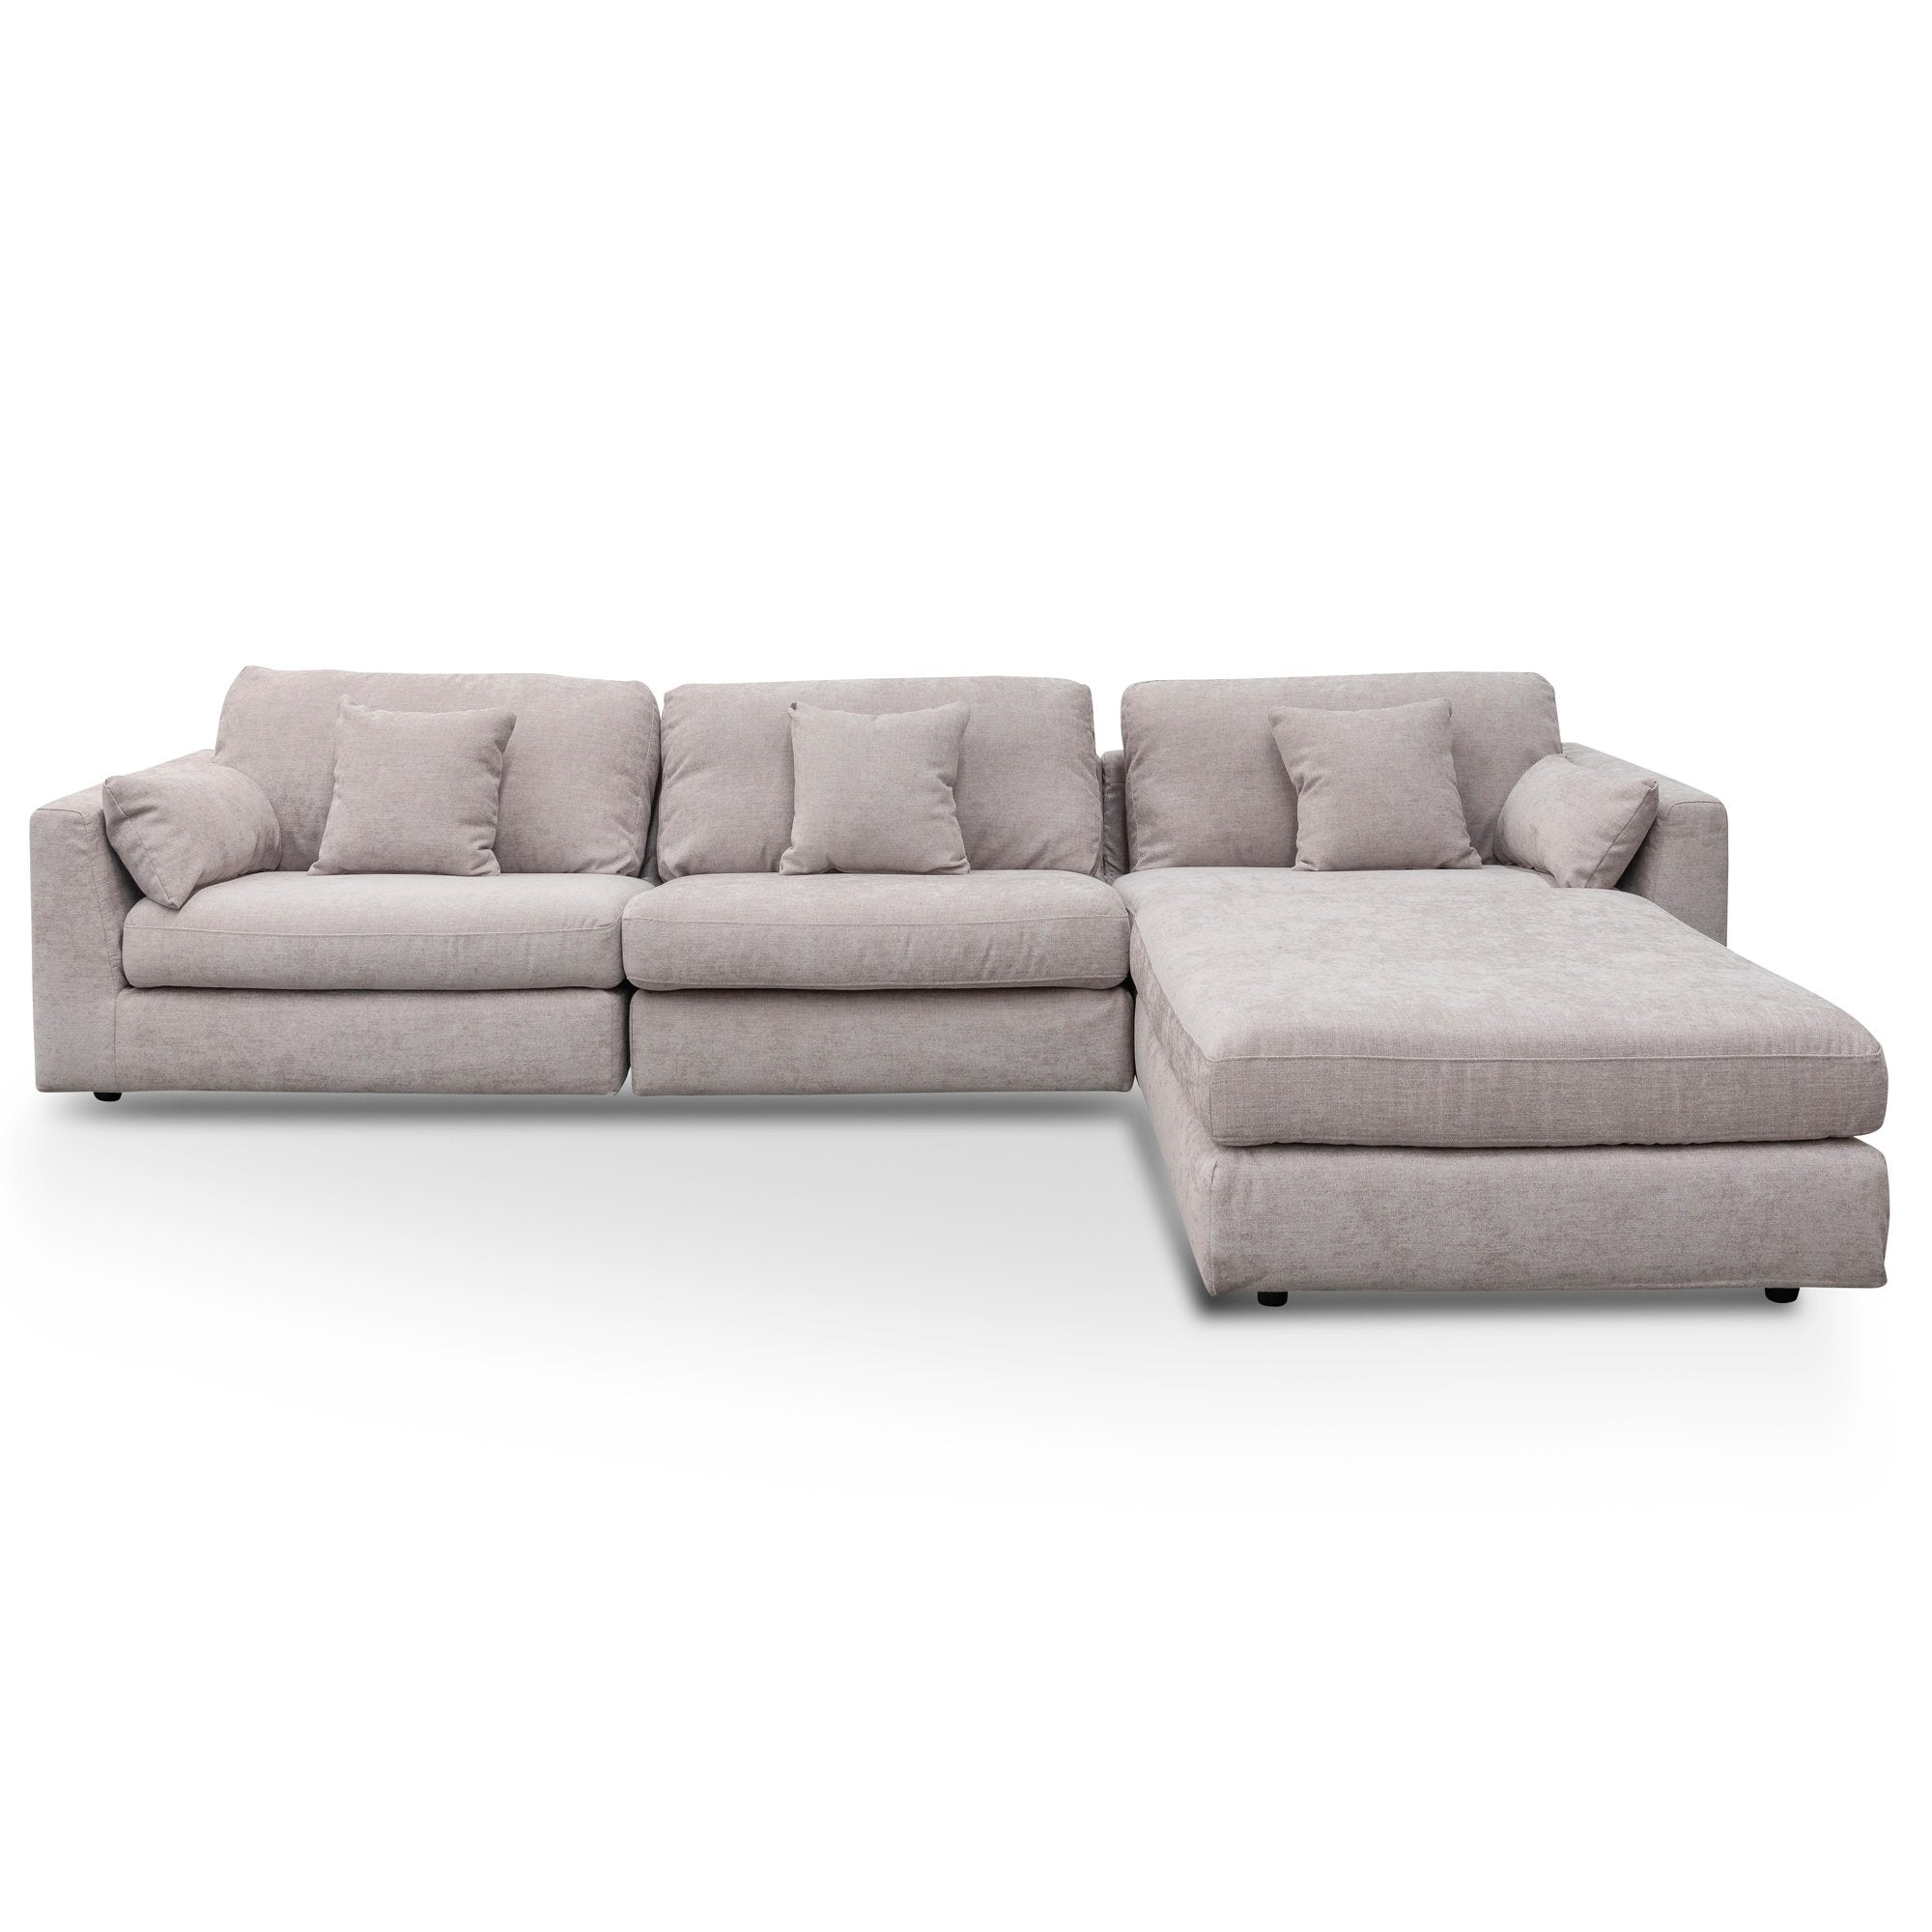 Adeline 4 Seater Fabric Sofa with Ottoman - Oyster Beige